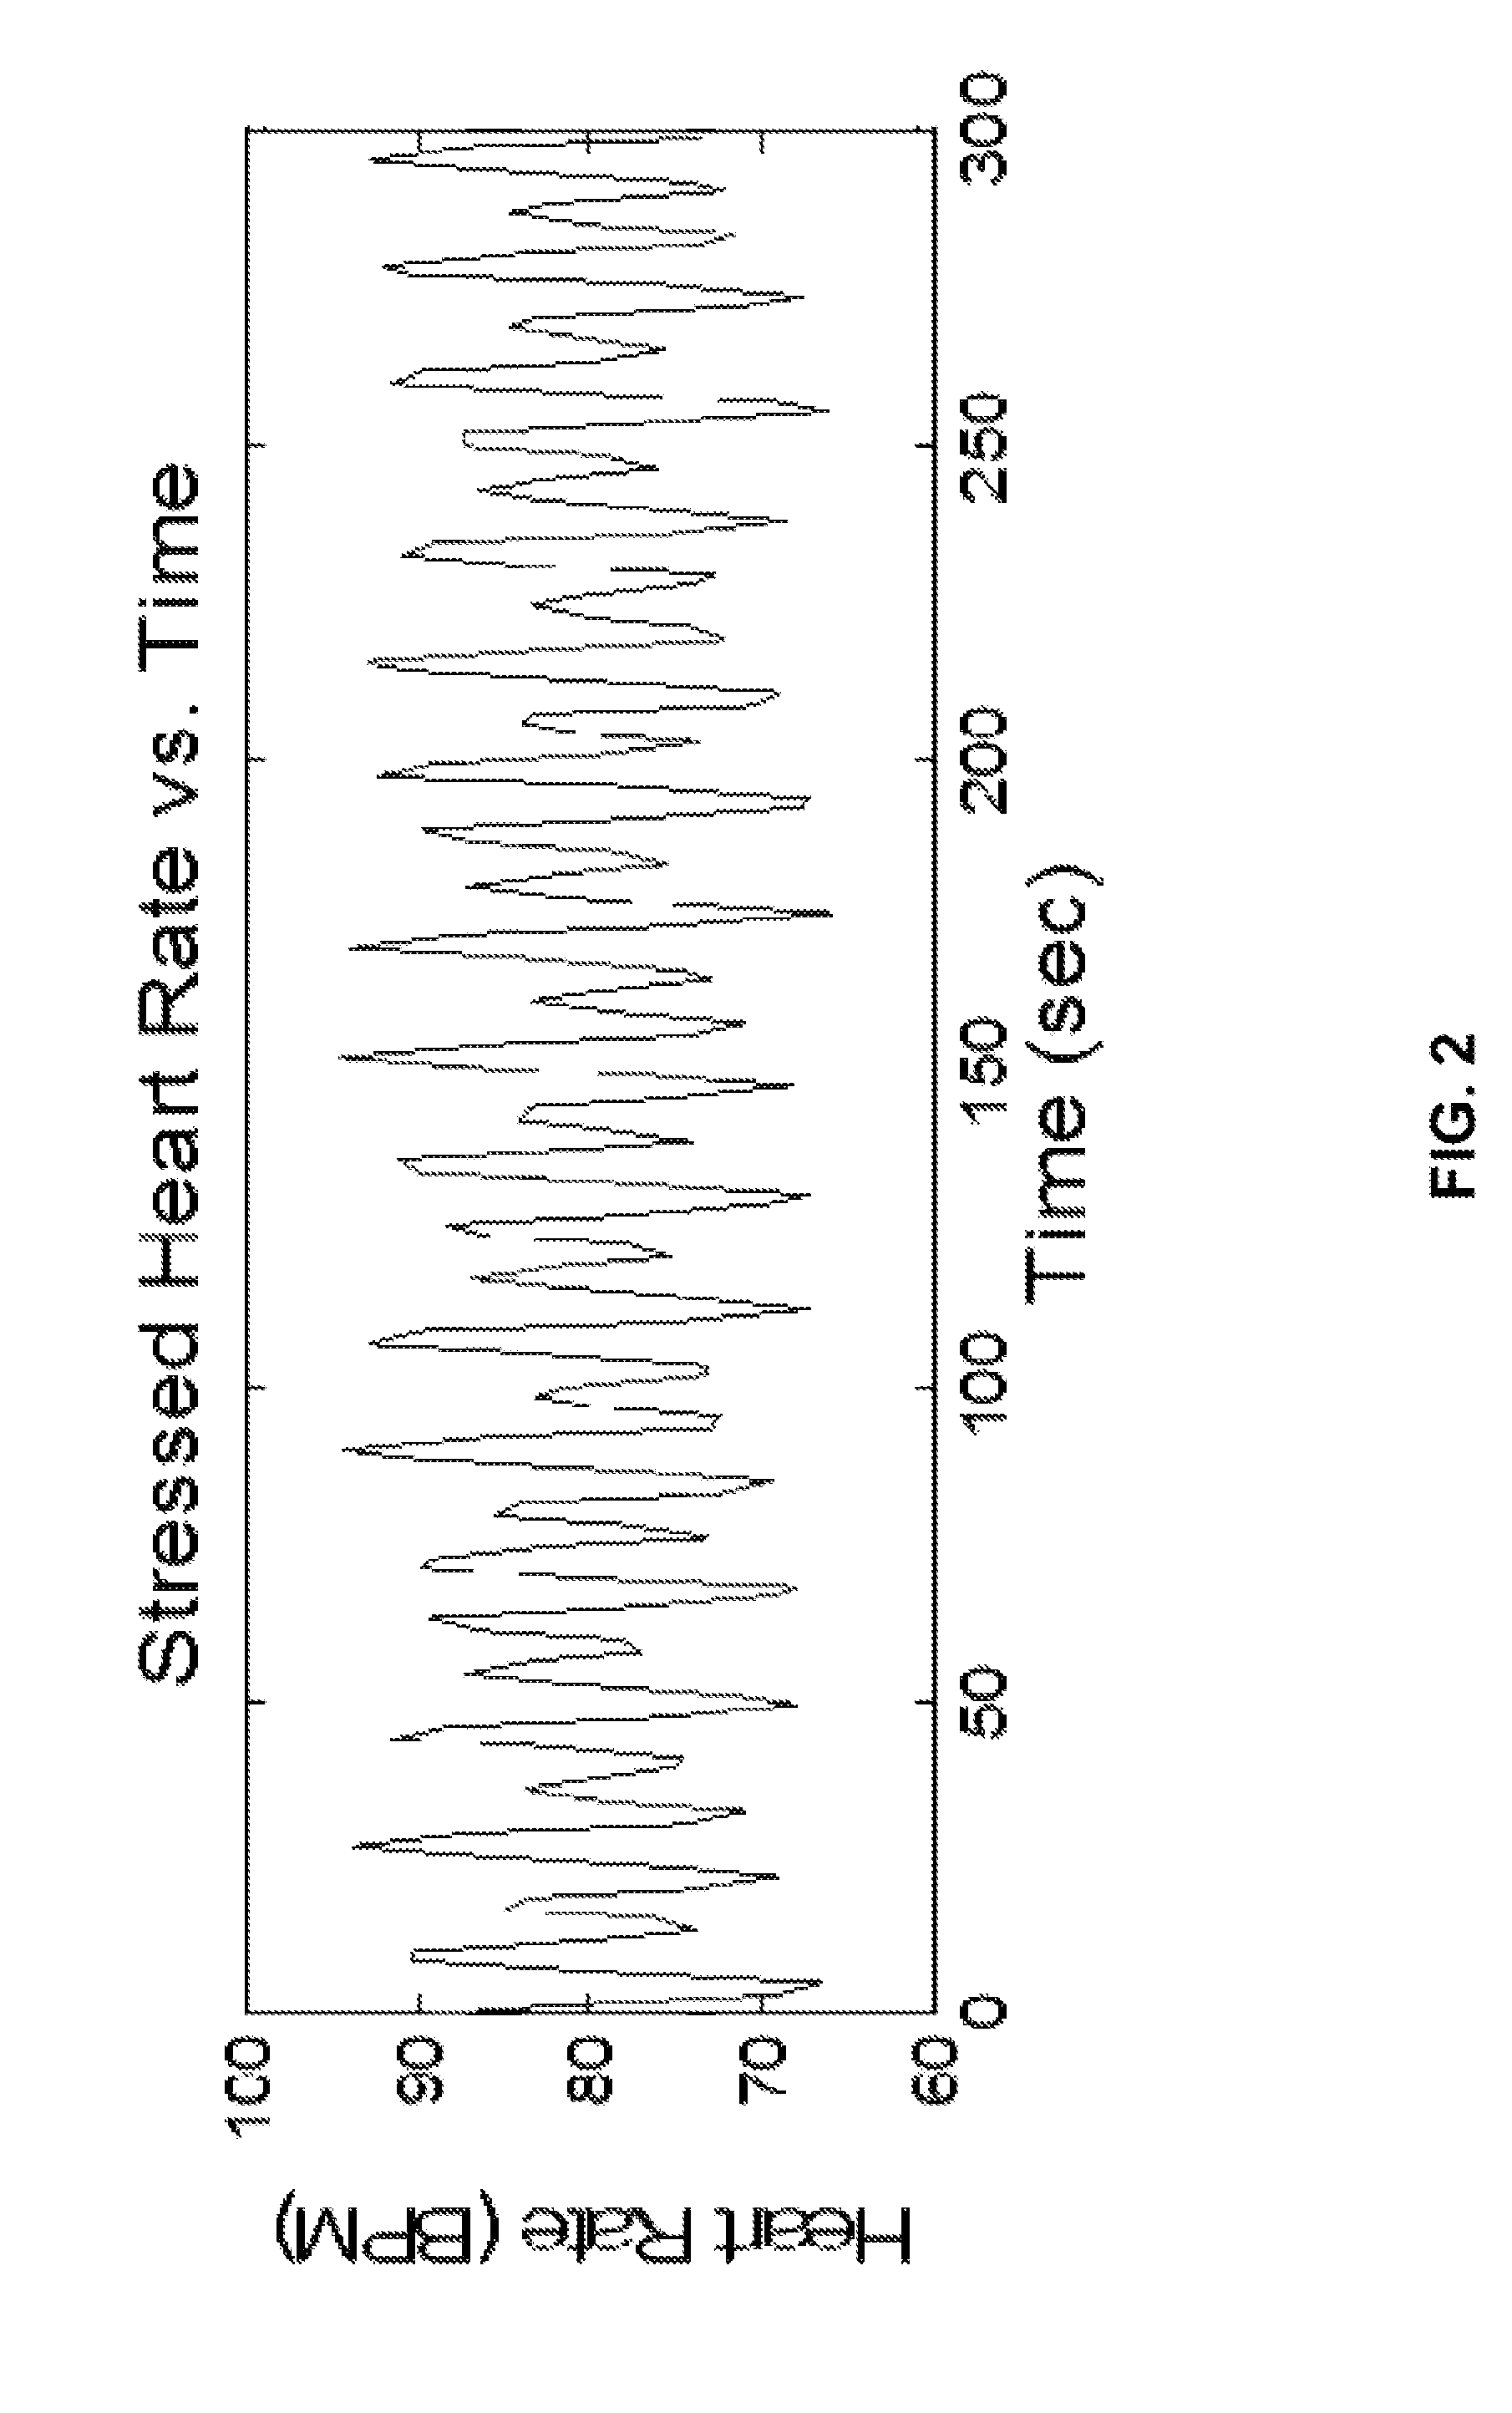 System and method for stress sensing